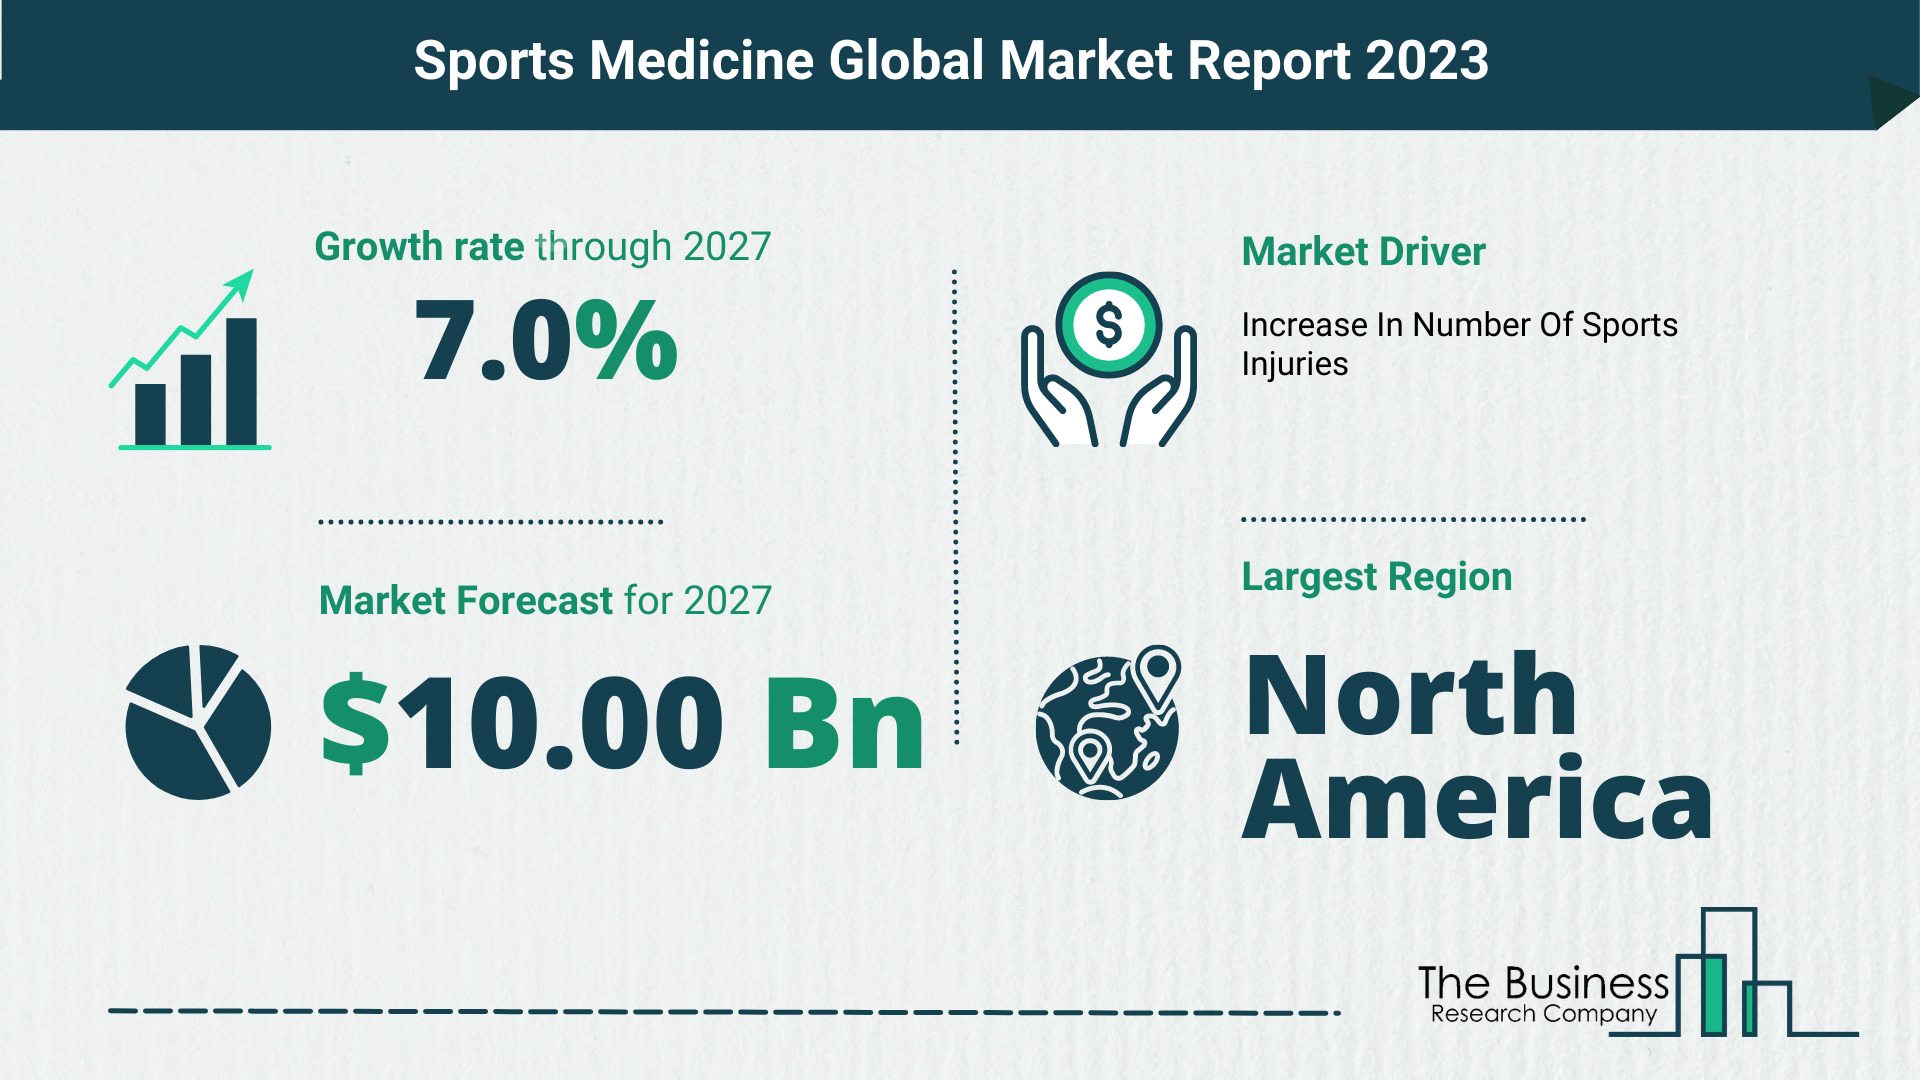 What Will The Sports Medicine Market Look Like In 2023?